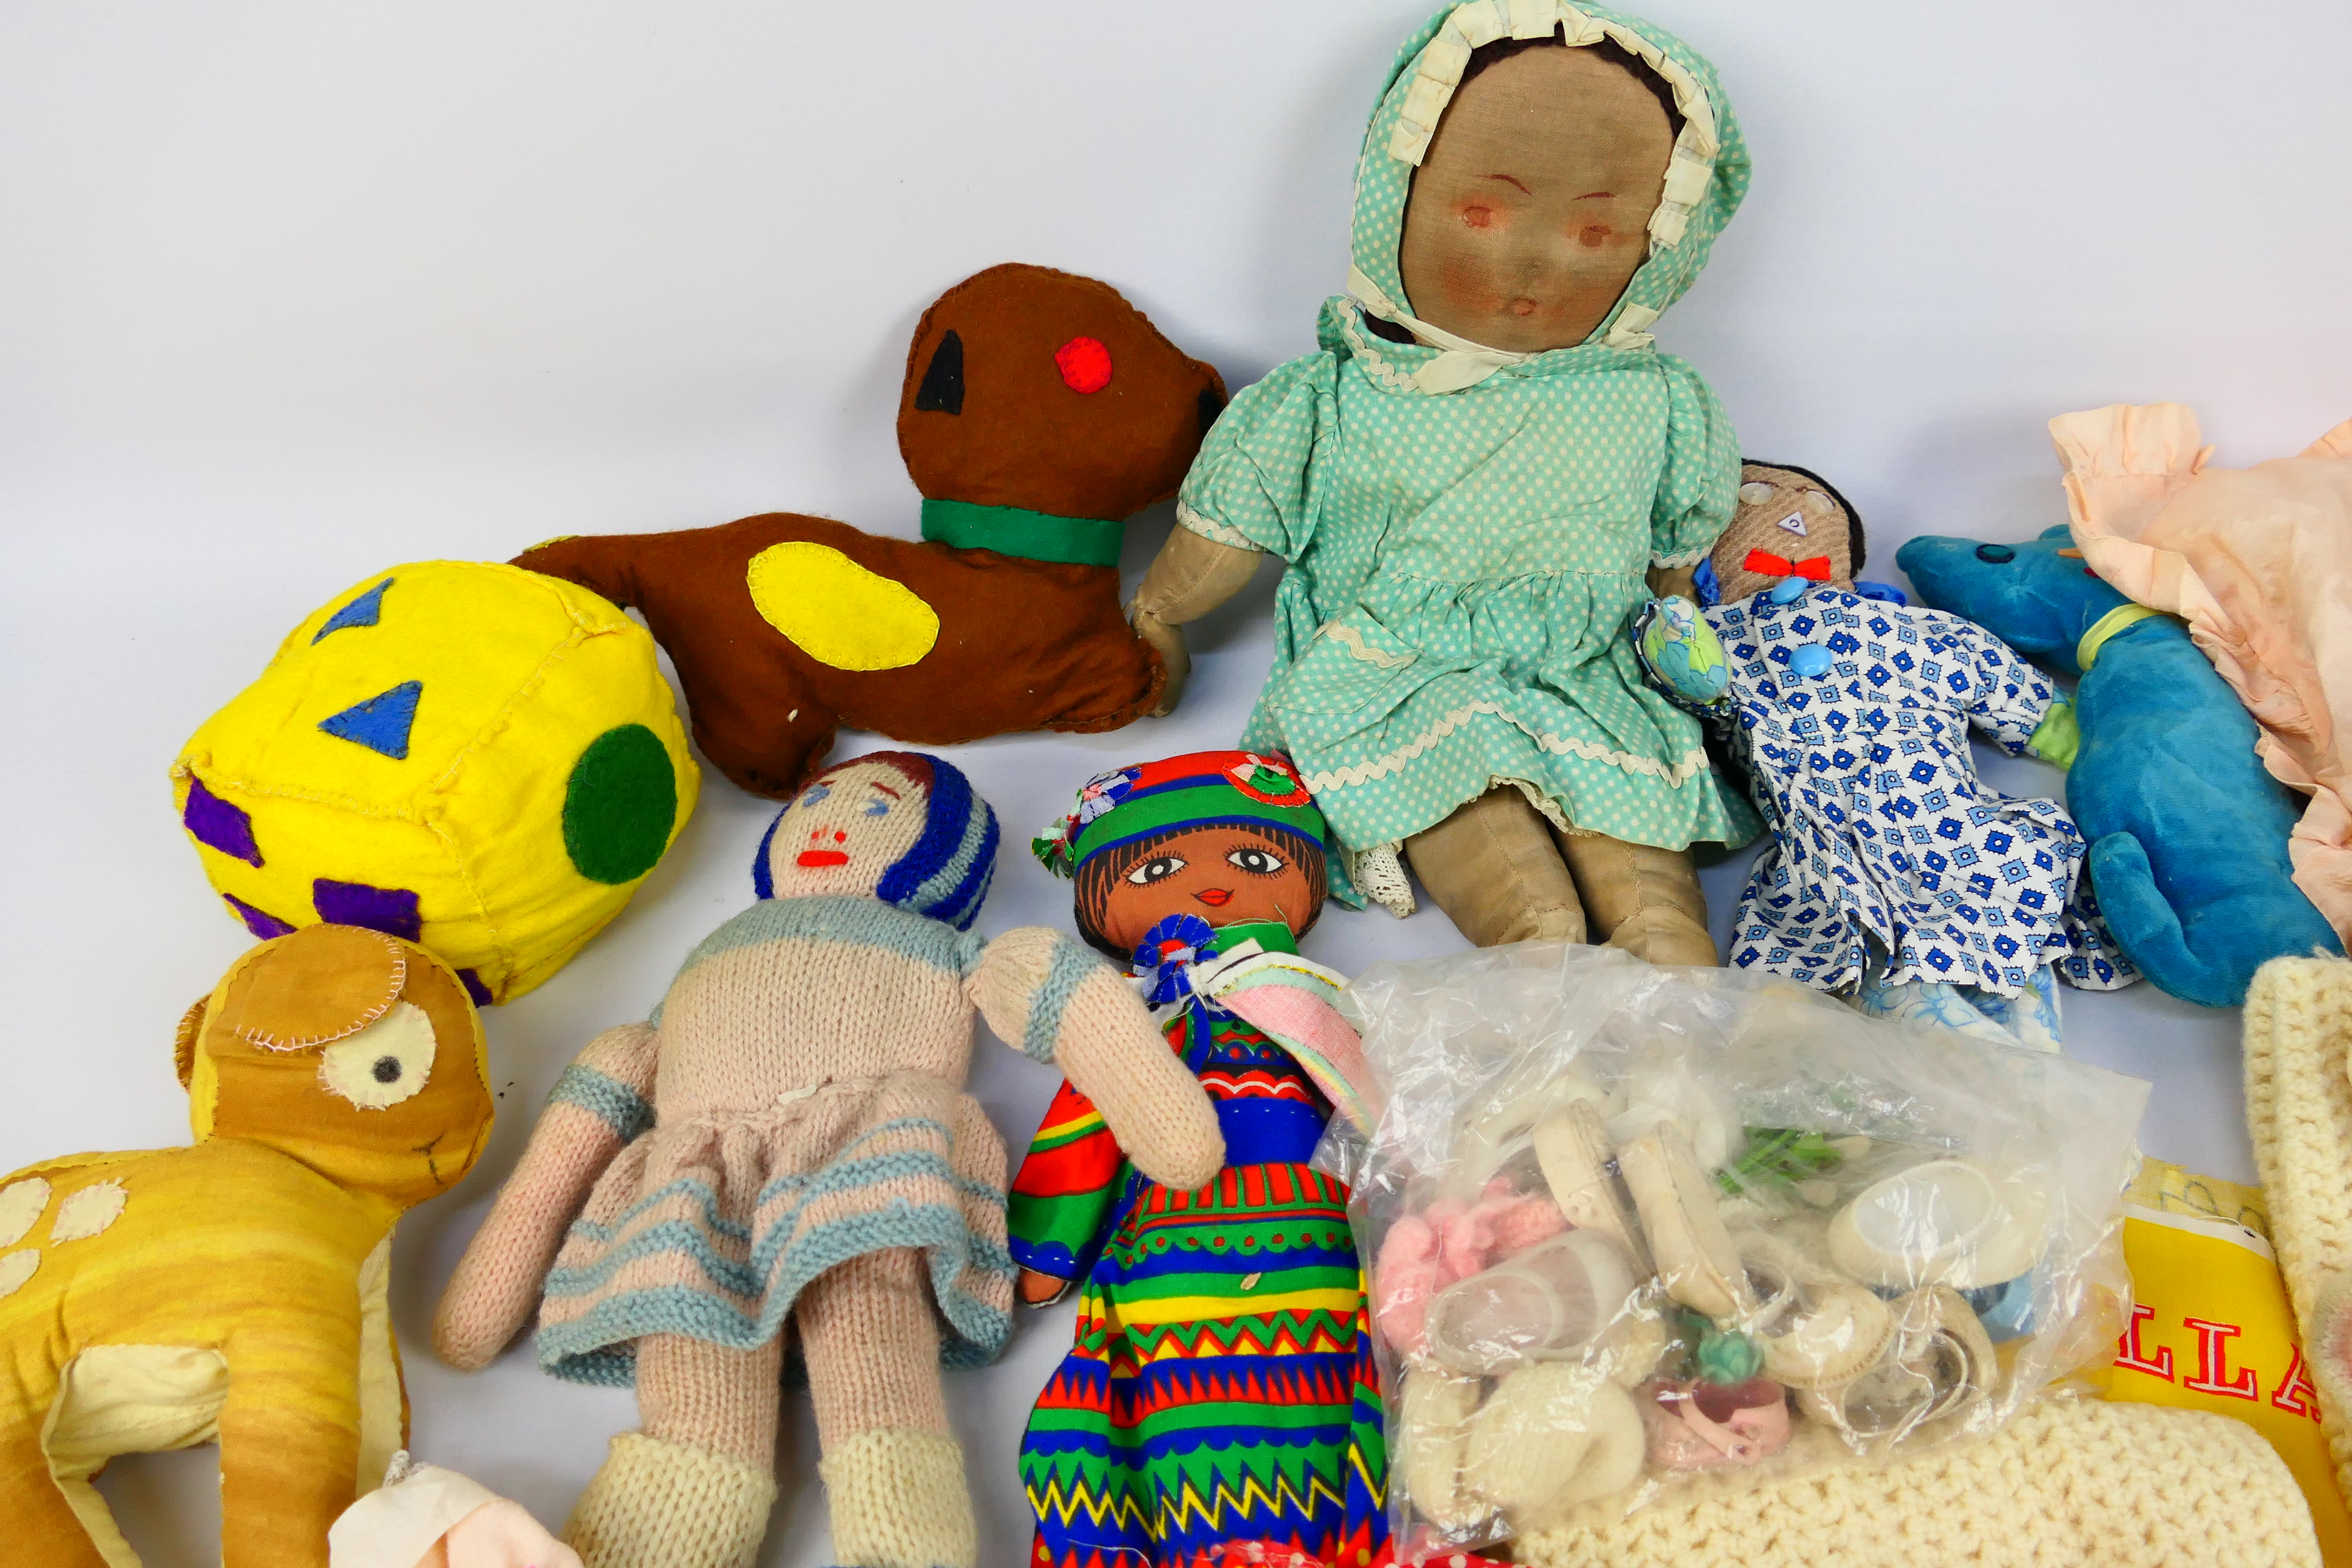 Plush- Rag Dolls - Handmade - A Collection of Unnamed and unbranded miscellaneous plush toys - Image 2 of 5